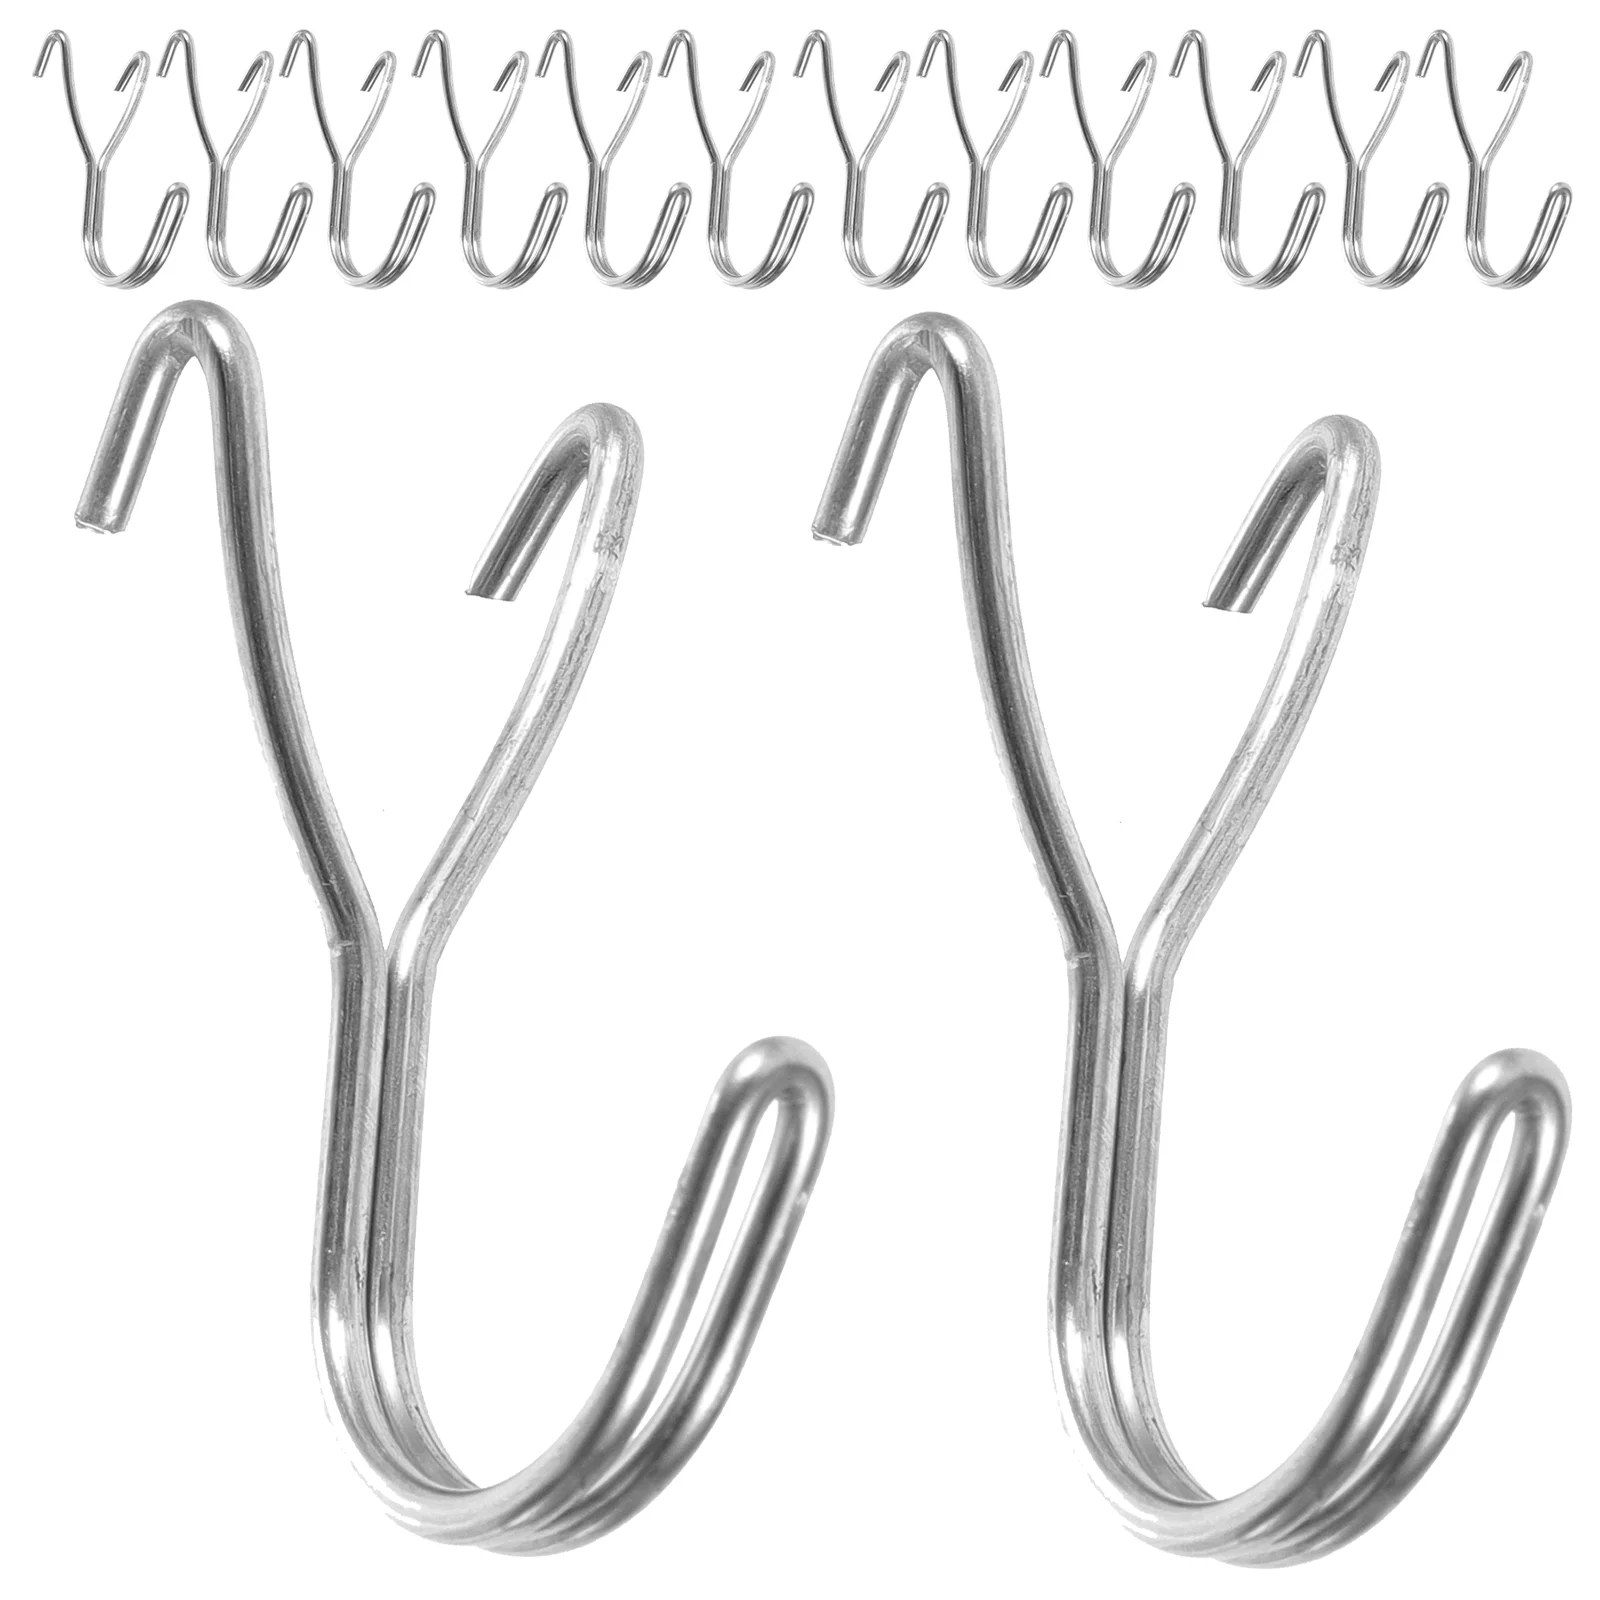 

20 Pcs Hook Hook Small Hooks for Hanging Pegs Perfboard Pegboard Tool 304 Stainless Steel